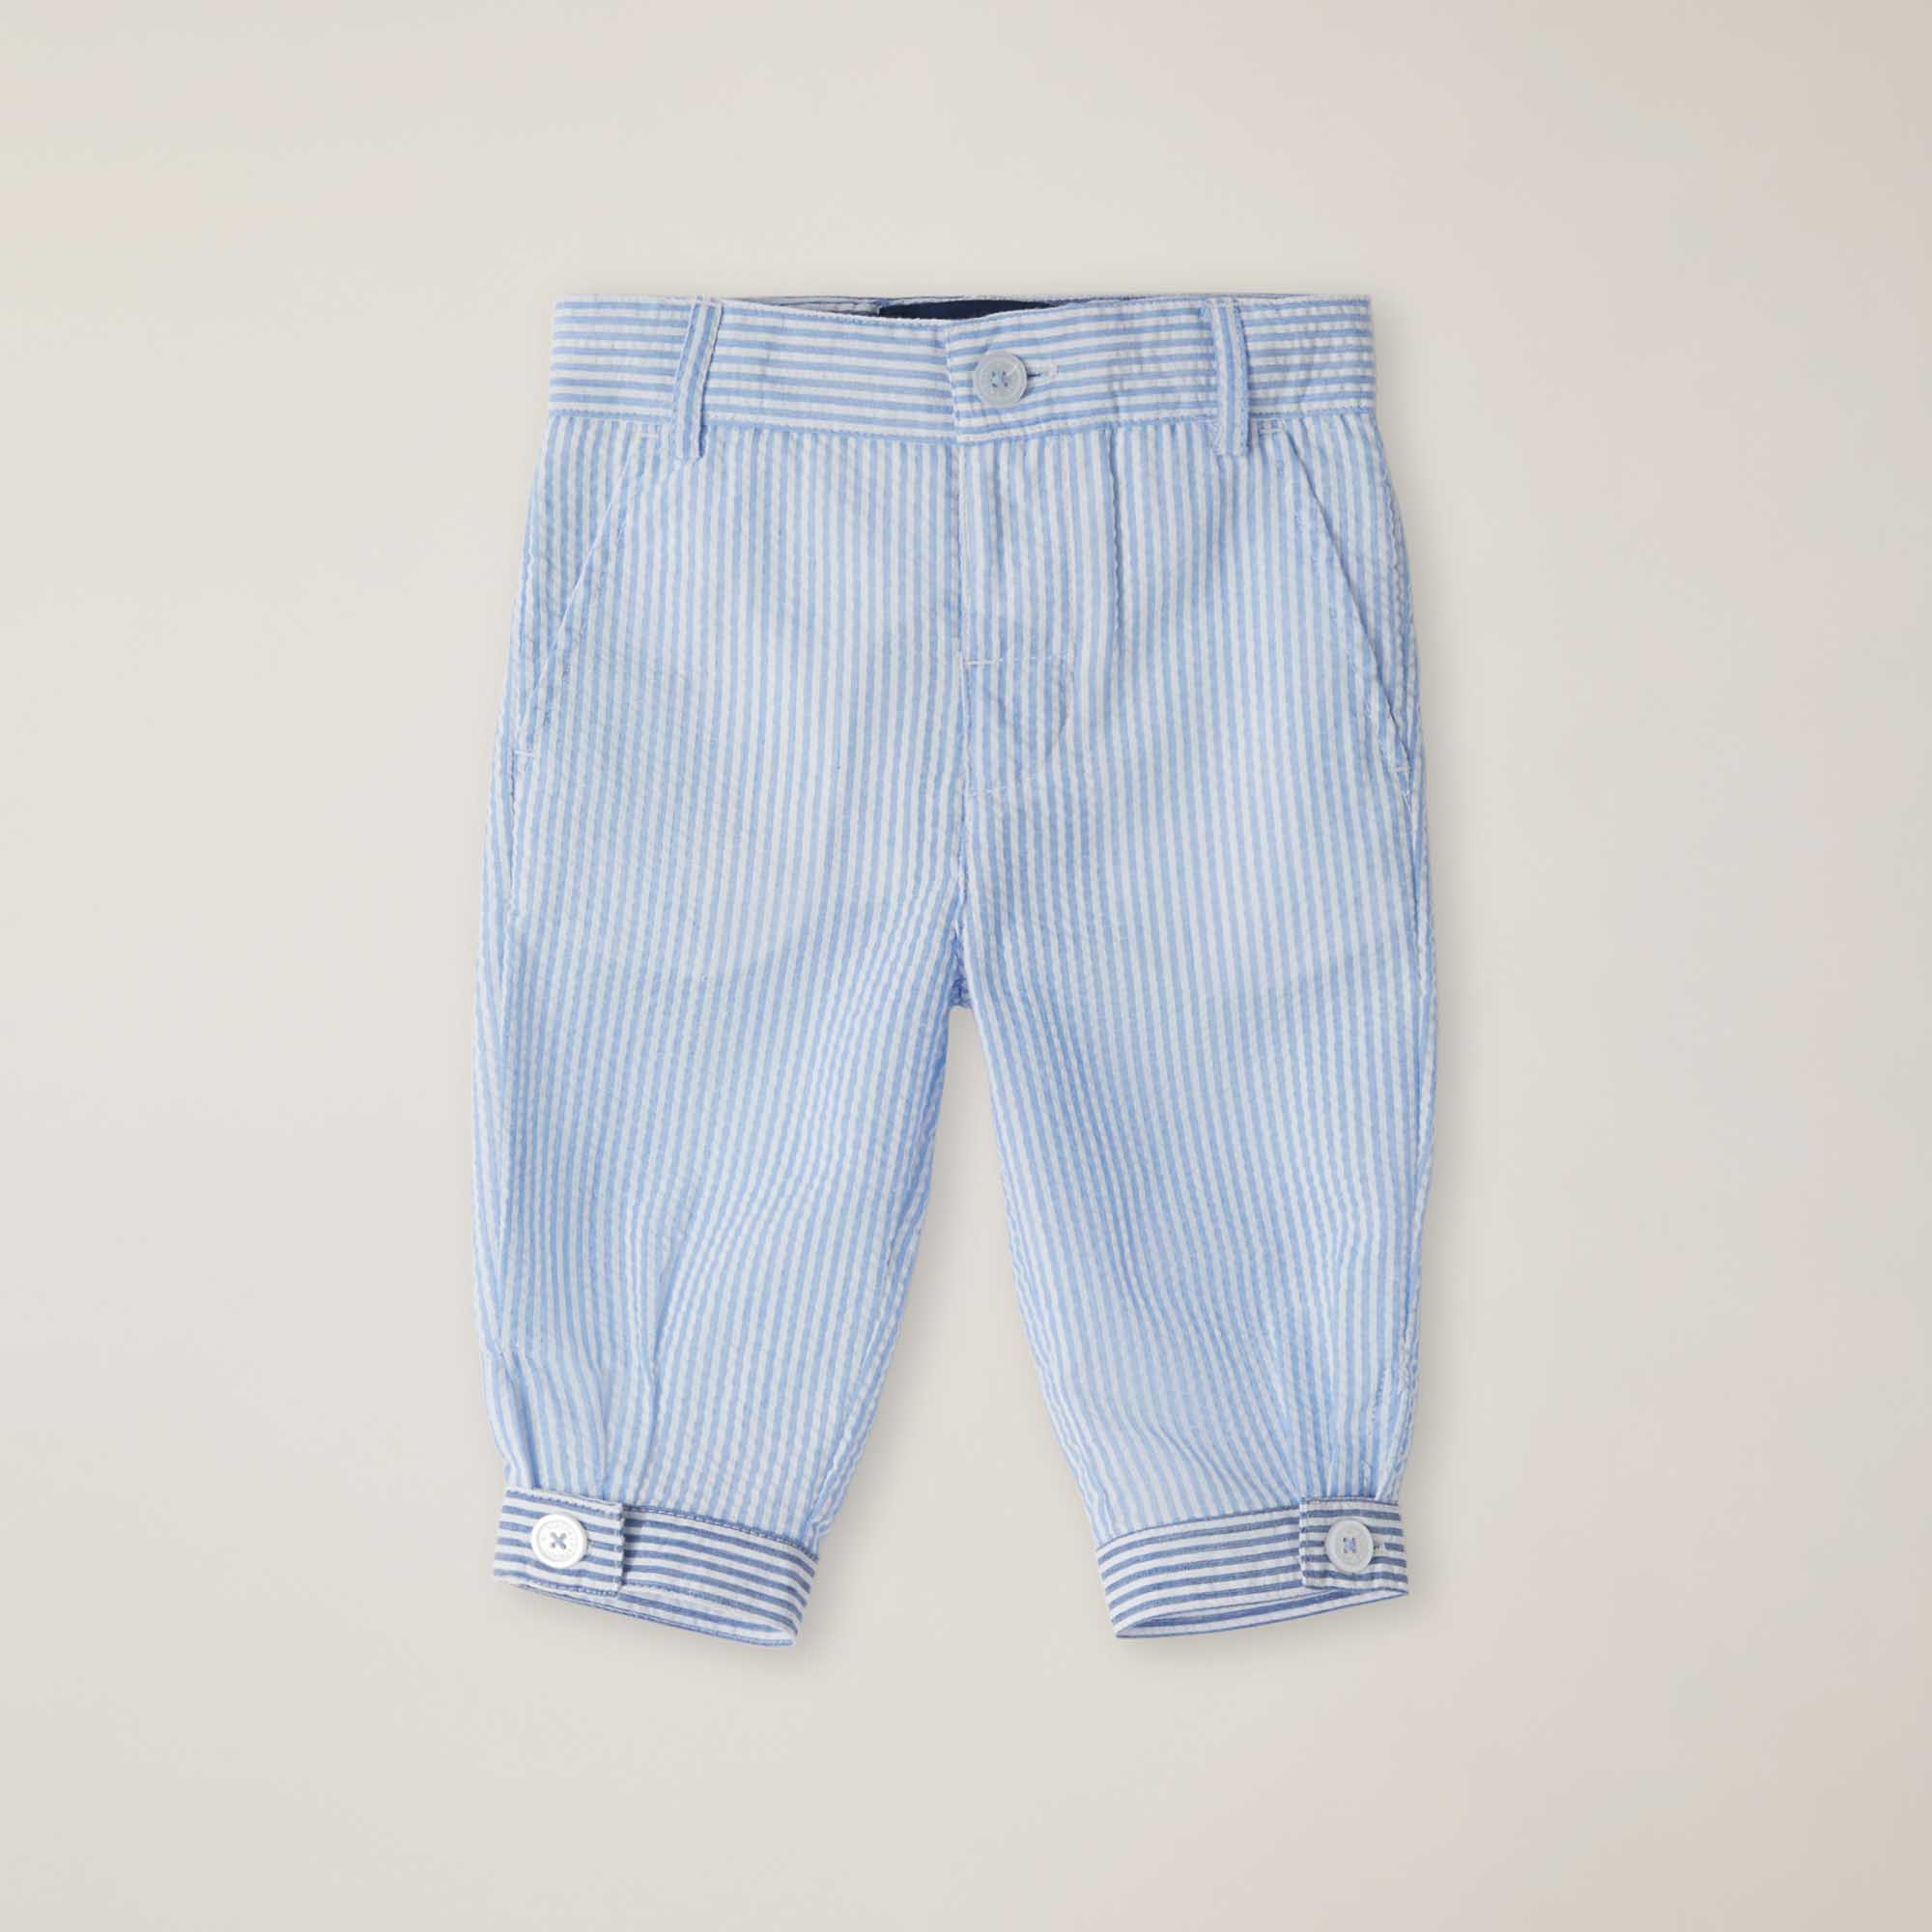 Seersucker Bermuda shorts with Dachshund embroidery, PALE SKY BLUE, large image number 0